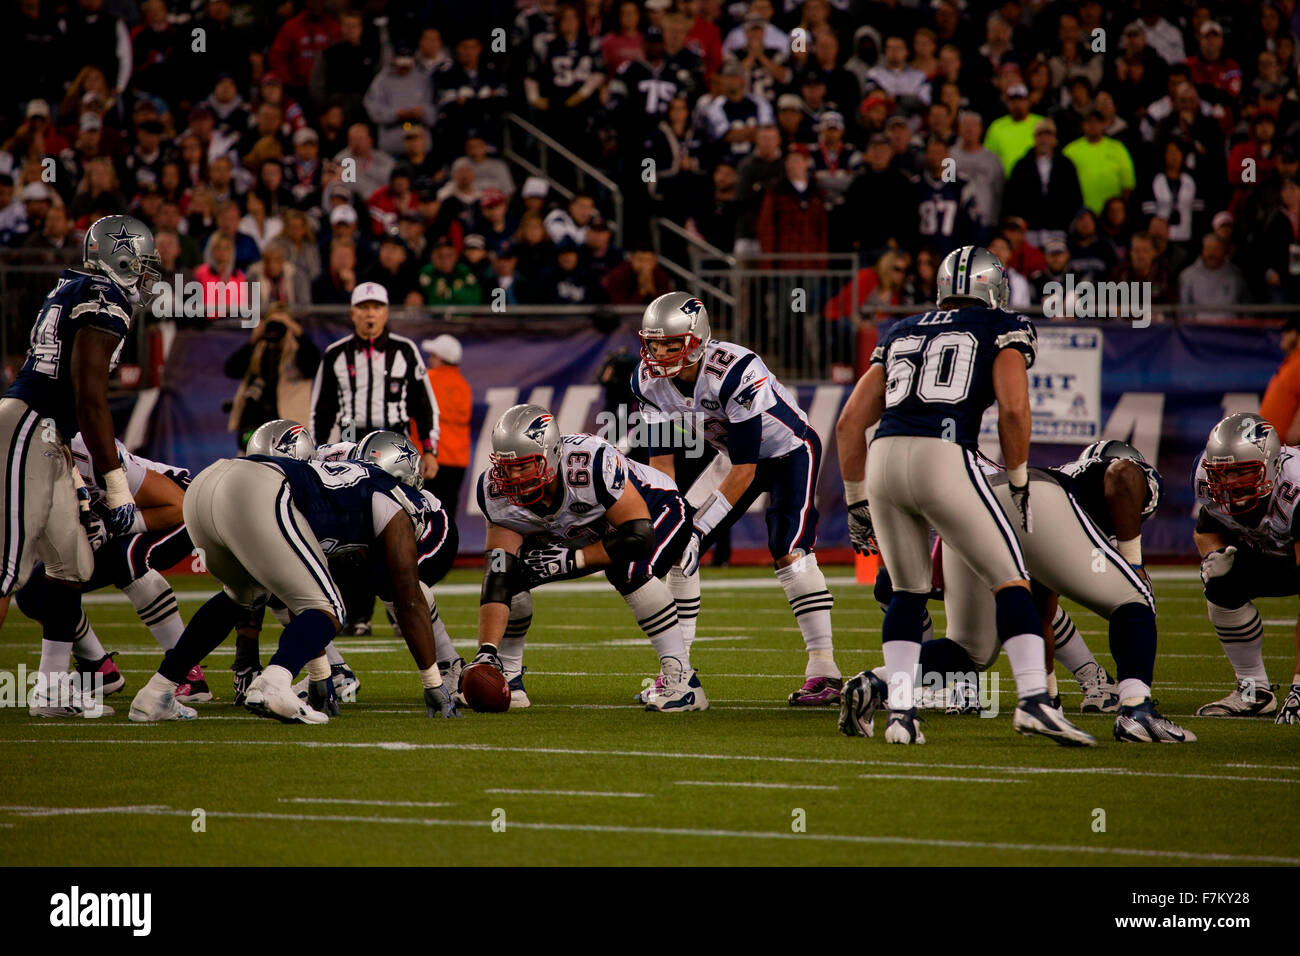 Quarterback Tom Brady, #12, takes hike at Gillette Stadium, the home of Super Bowl champs, New England Patriots, NFL Team play against Dallas Cowboys,October 16, 2011, Foxborough, Boston, MA Stock Photo